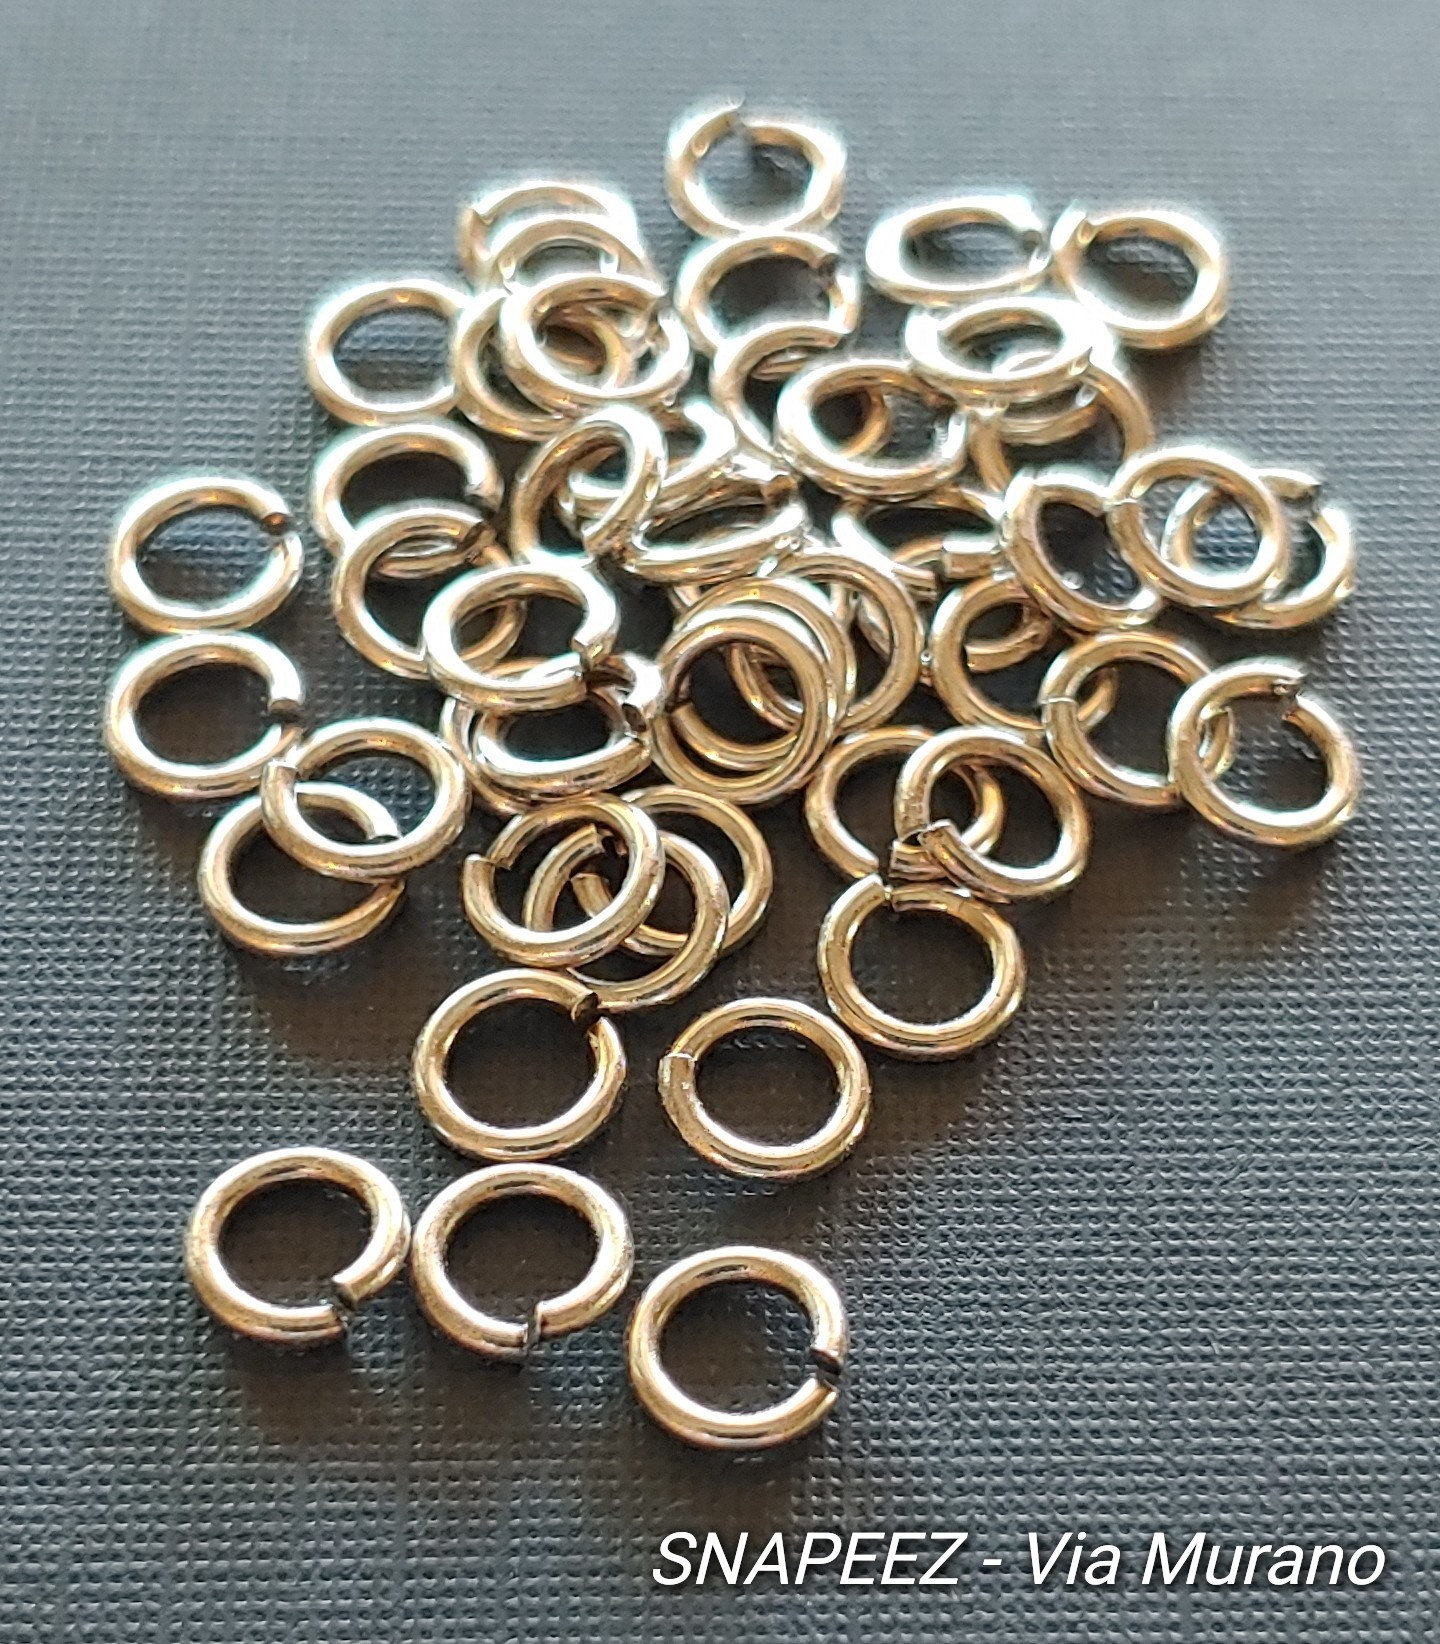 925 Sterling Silver Jump Rings, Open Snap Close Rings, 4.5 mm 5 mm or 6 mm